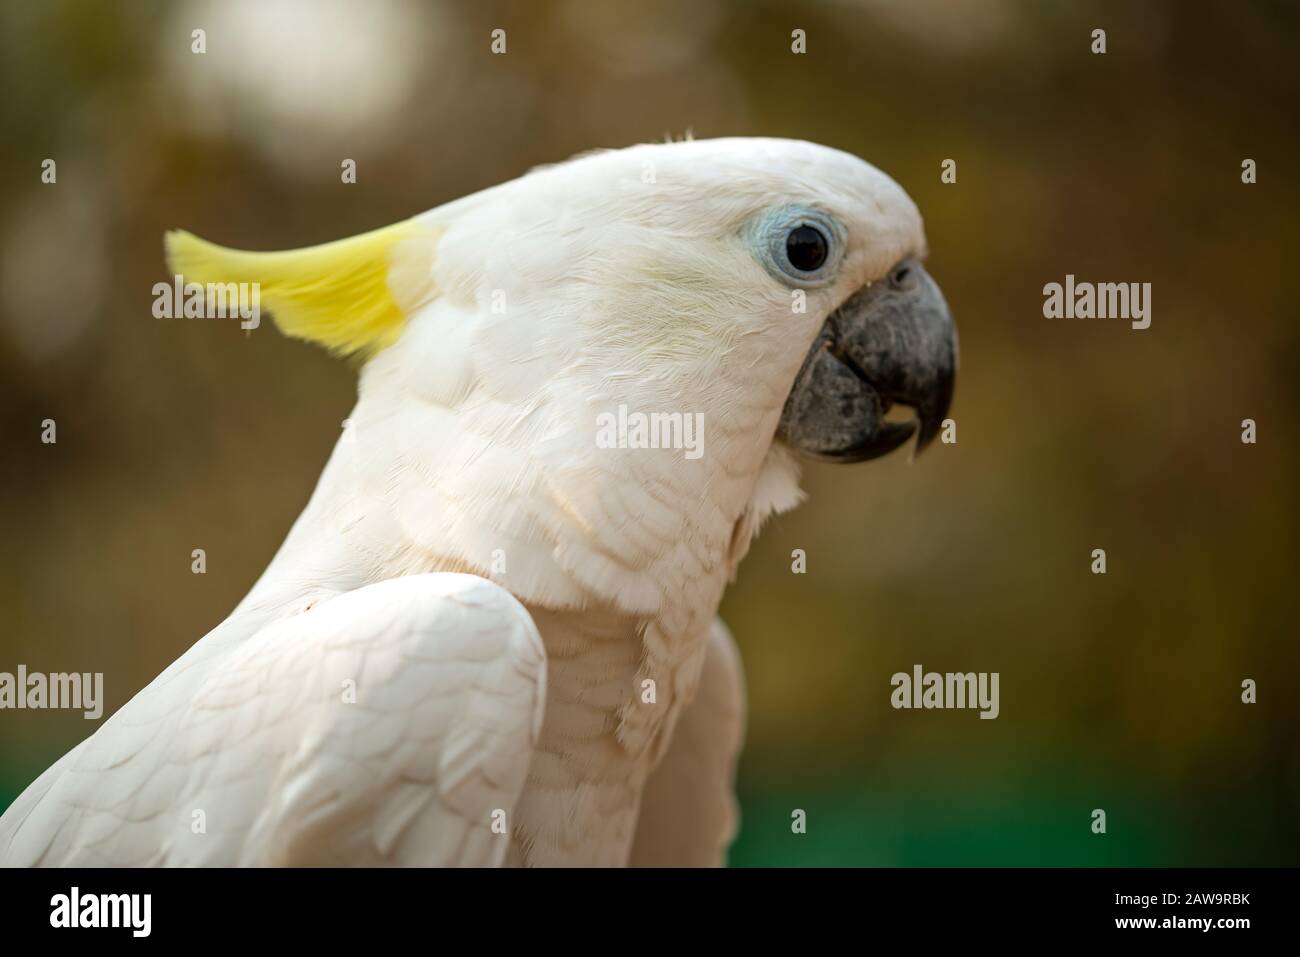 Portrait of cockatoo parrot, Yellow-crested cockatoo white parrot head close-up Stock Photo